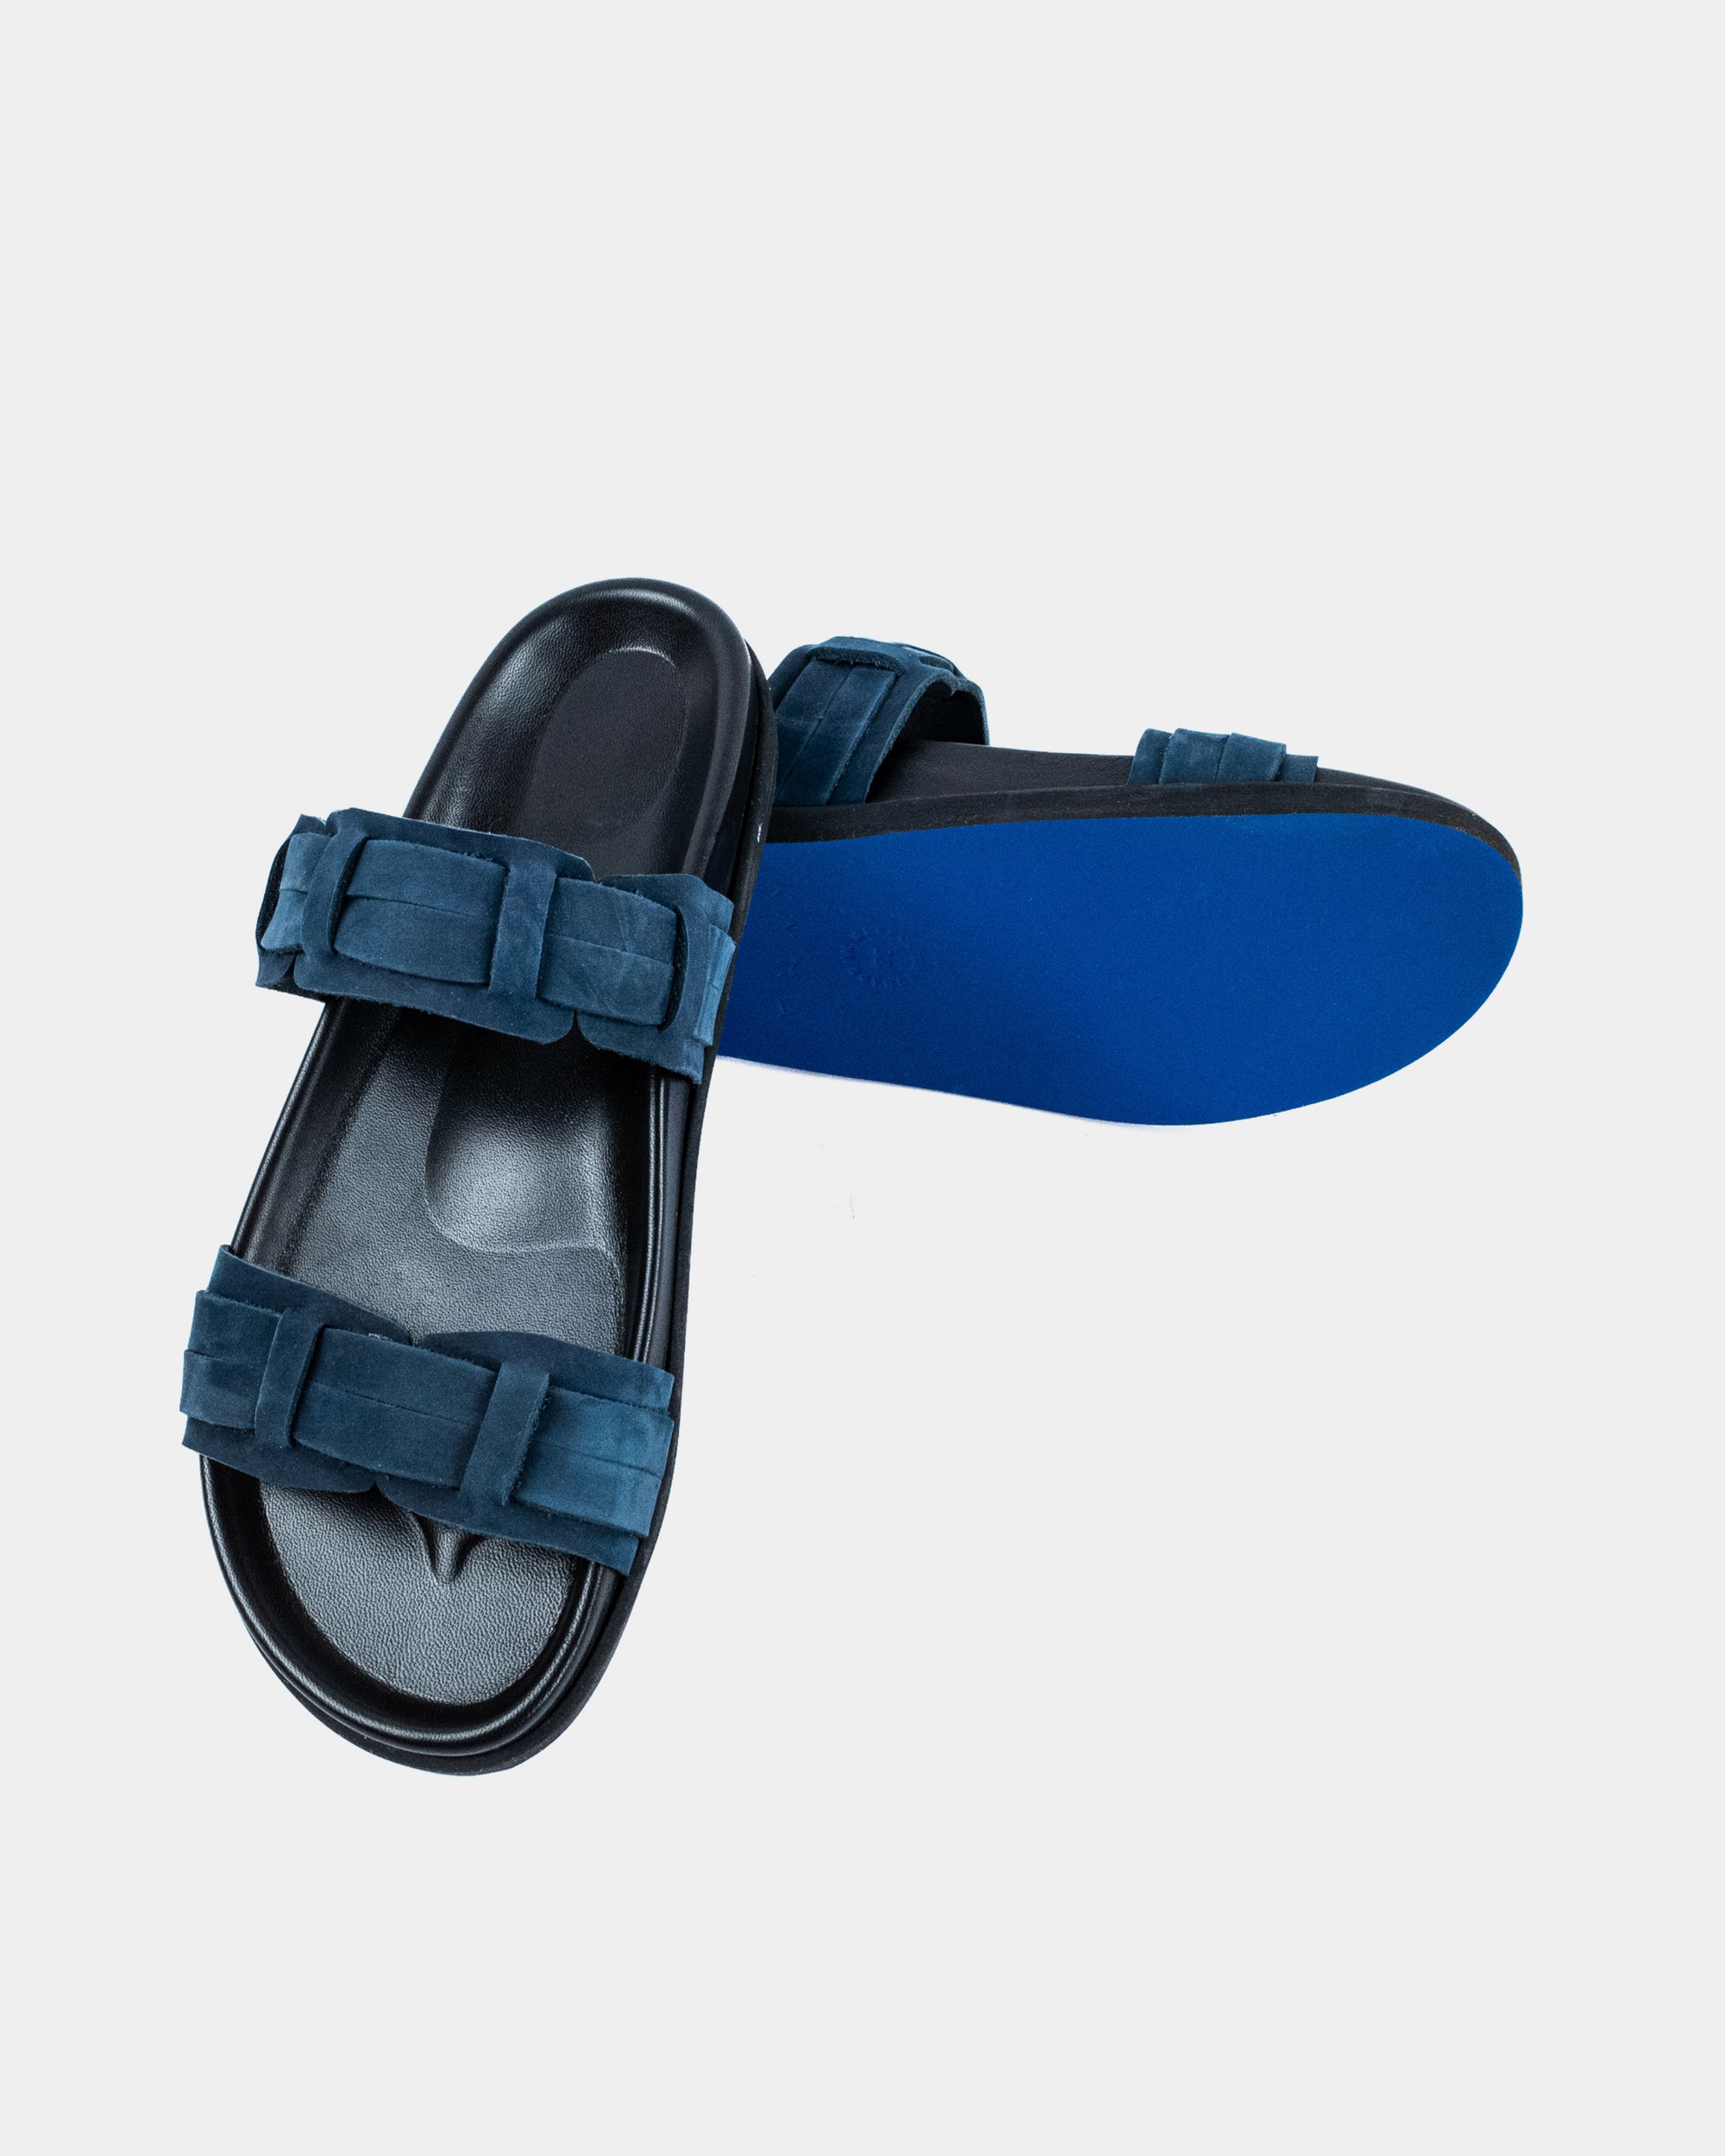 LEATHER SANDALS-FLAT SANDALS-KYMA SANDALS-STRAPPY SANDALS-NAVY